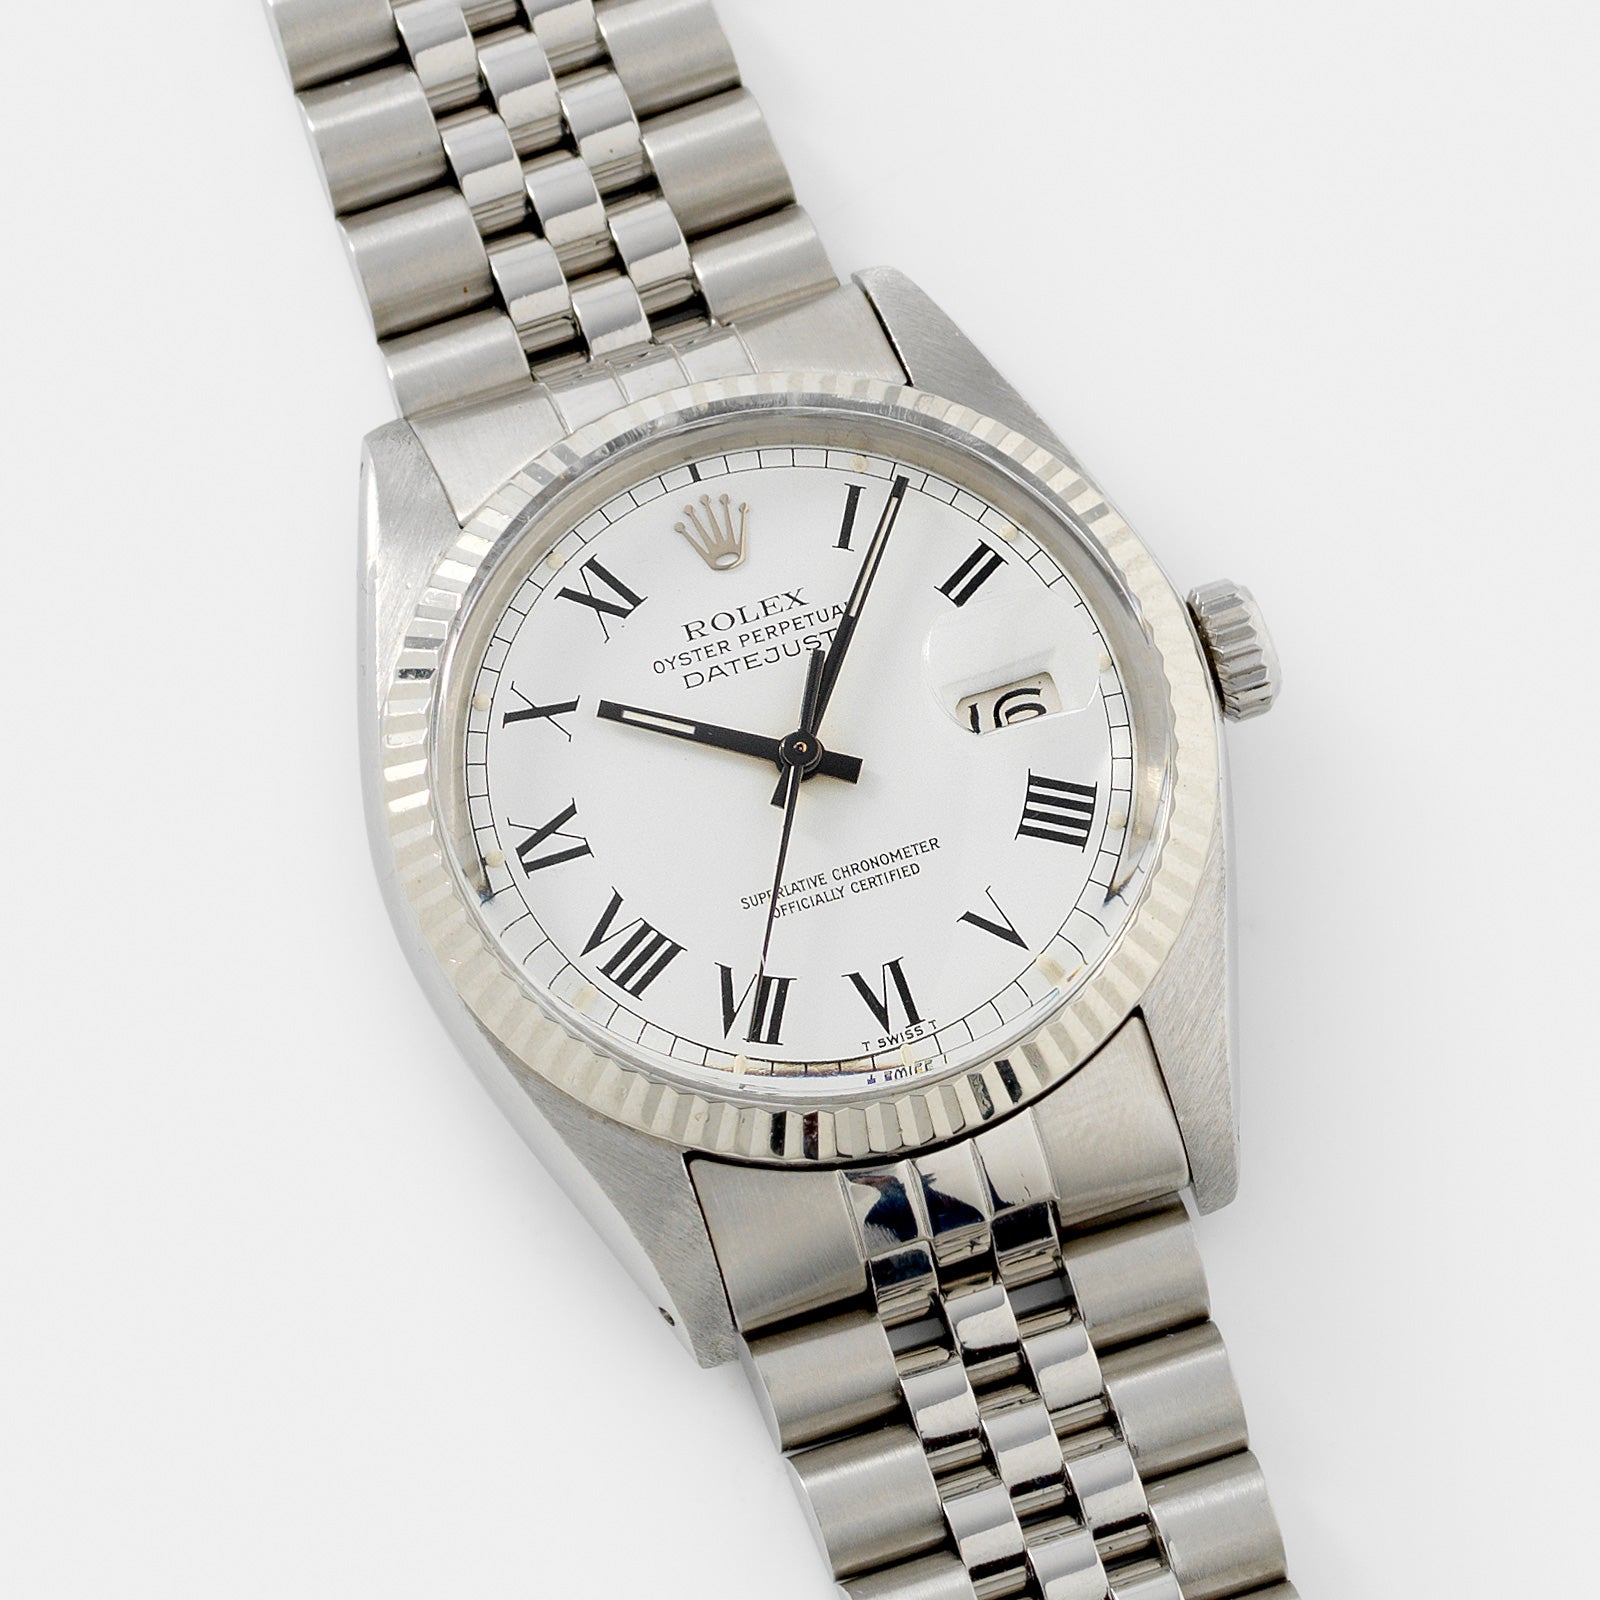 Rolex Datejust Reference 16014 White Buckley Dial